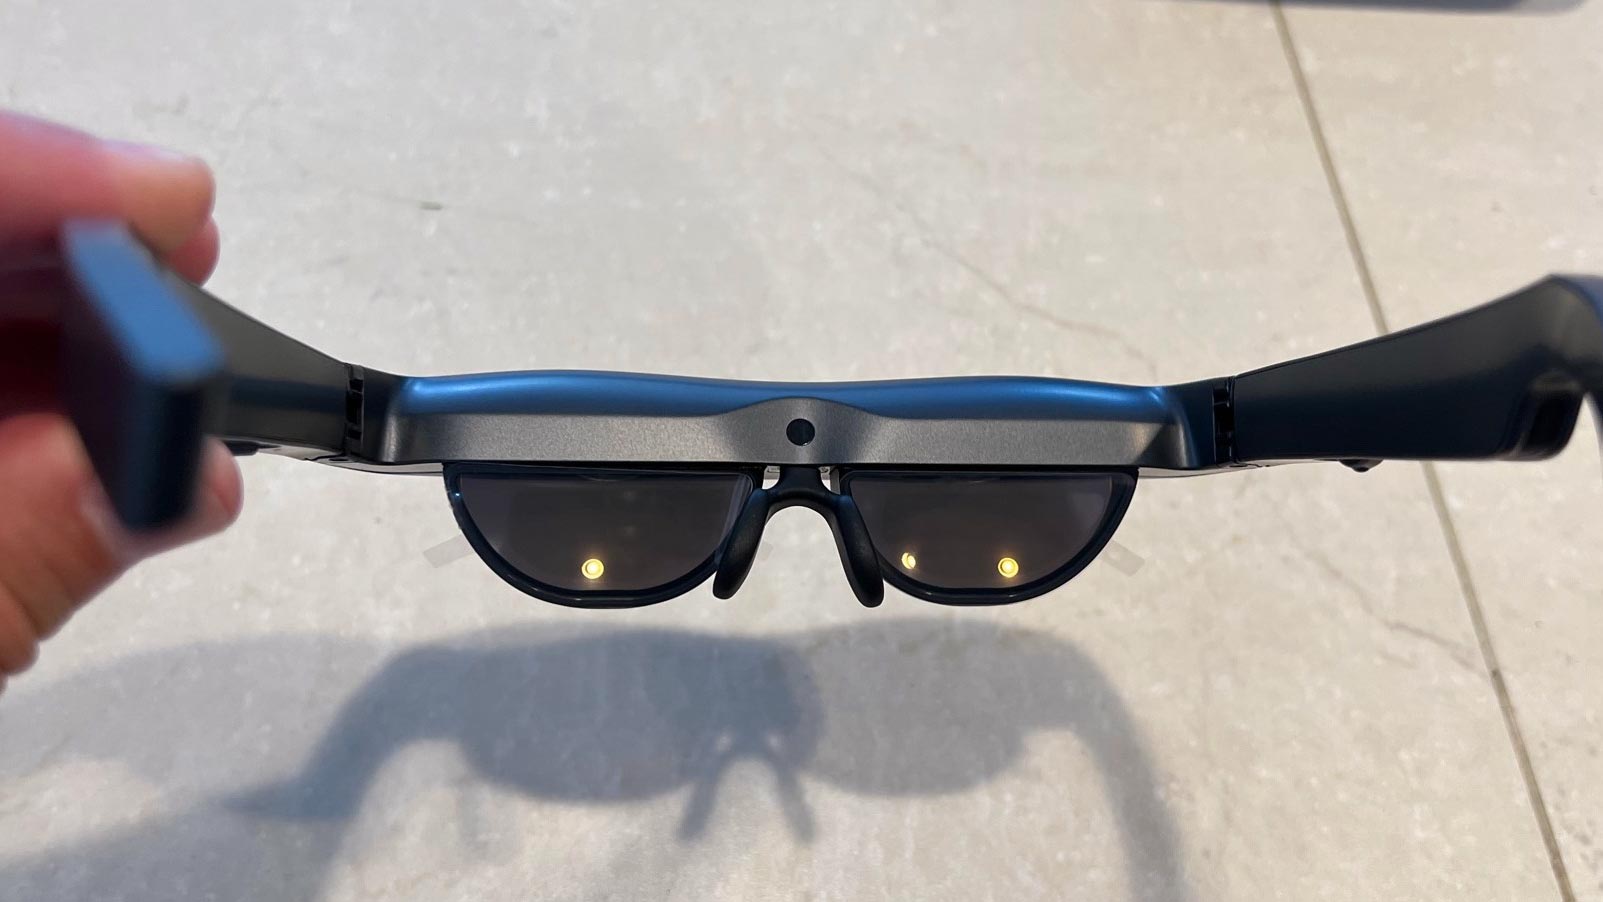 A look down at the lenses and screen of the TCL smart glasses